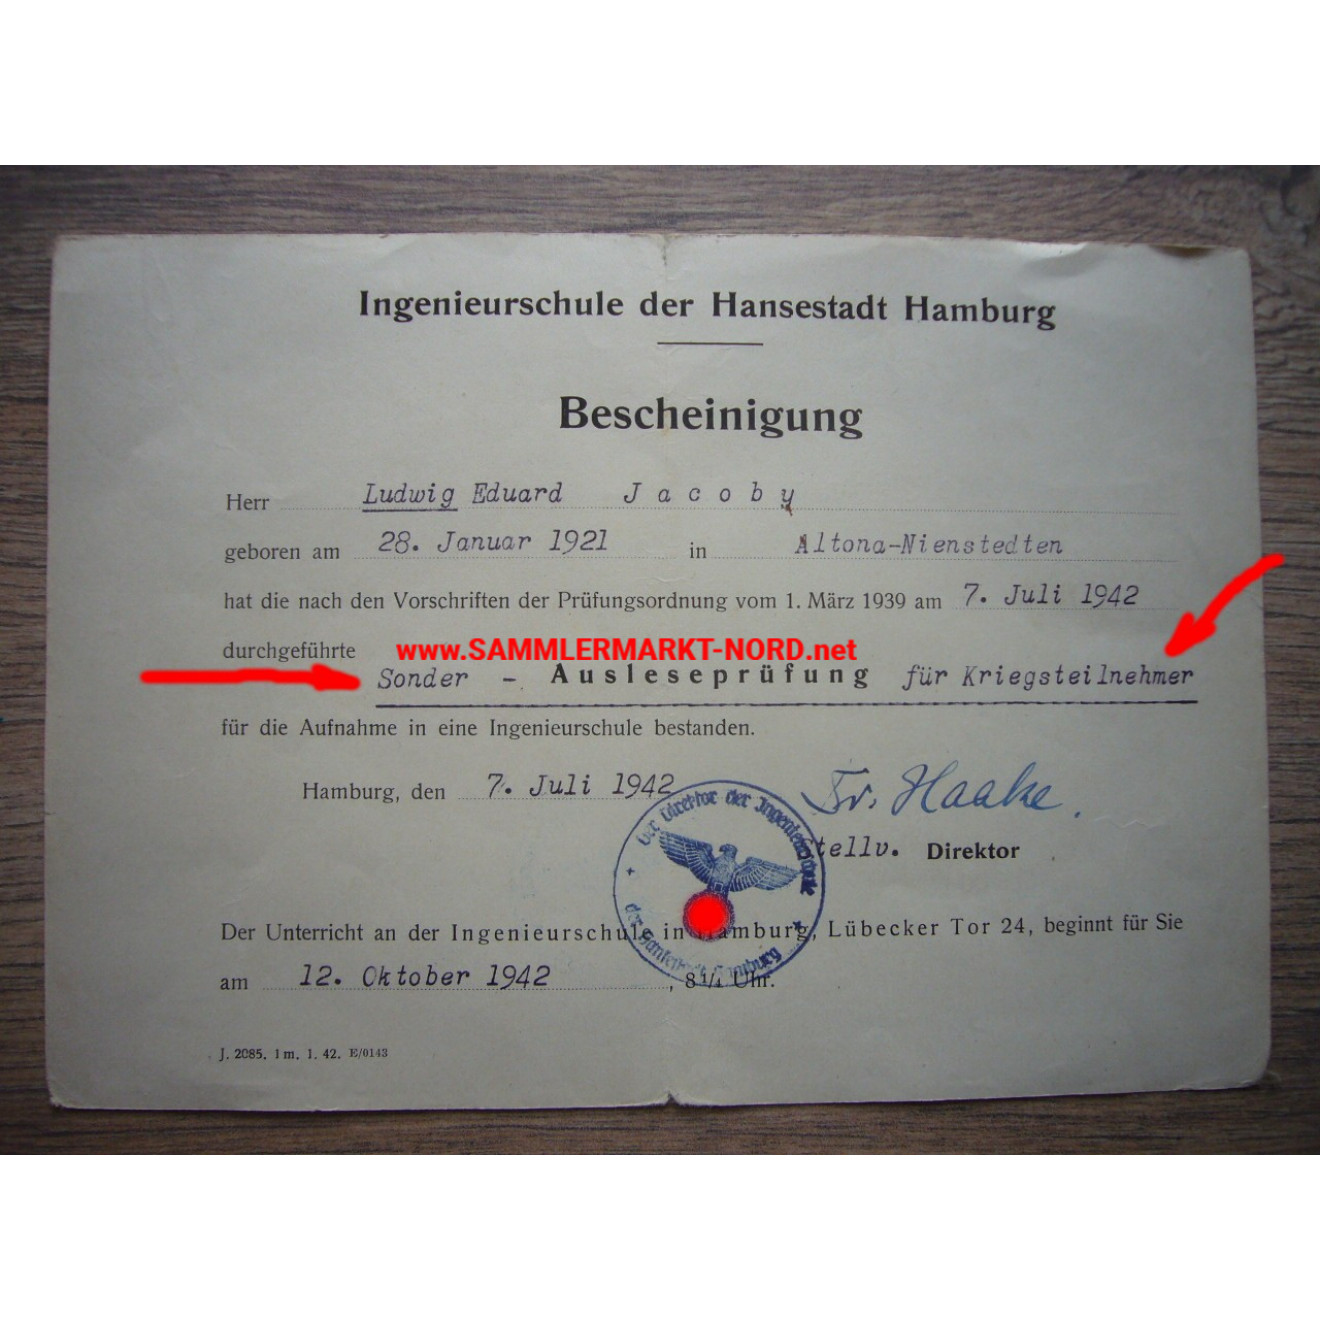 Hamburg School of Engineering - Special selection examination for participants in the war in 1942